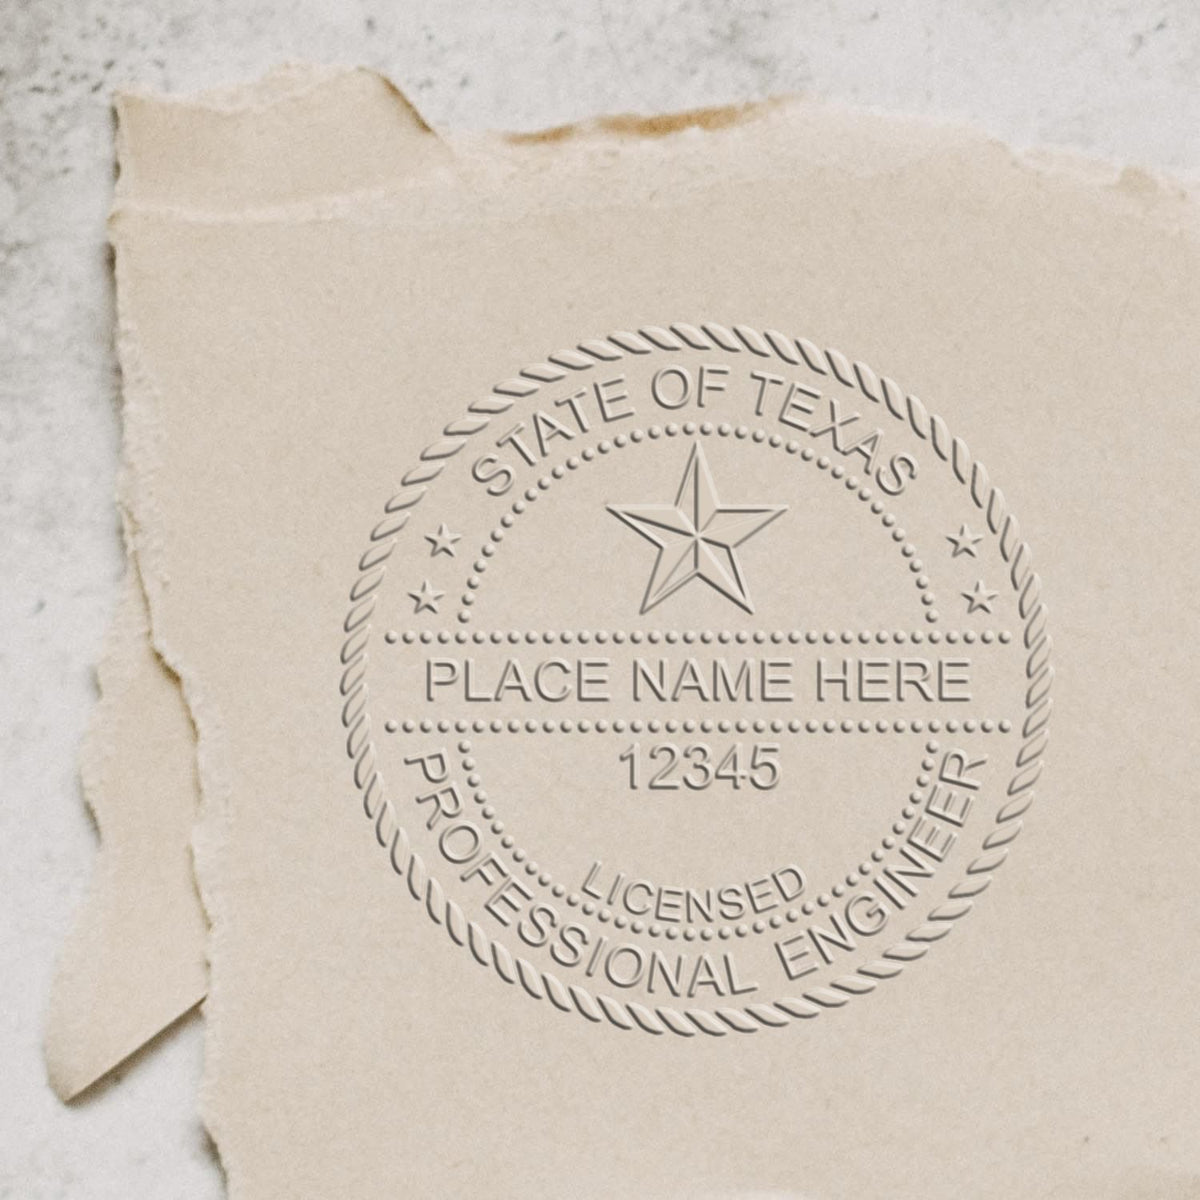 A photograph of the Long Reach Texas PE Seal stamp impression reveals a vivid, professional image of the on paper.